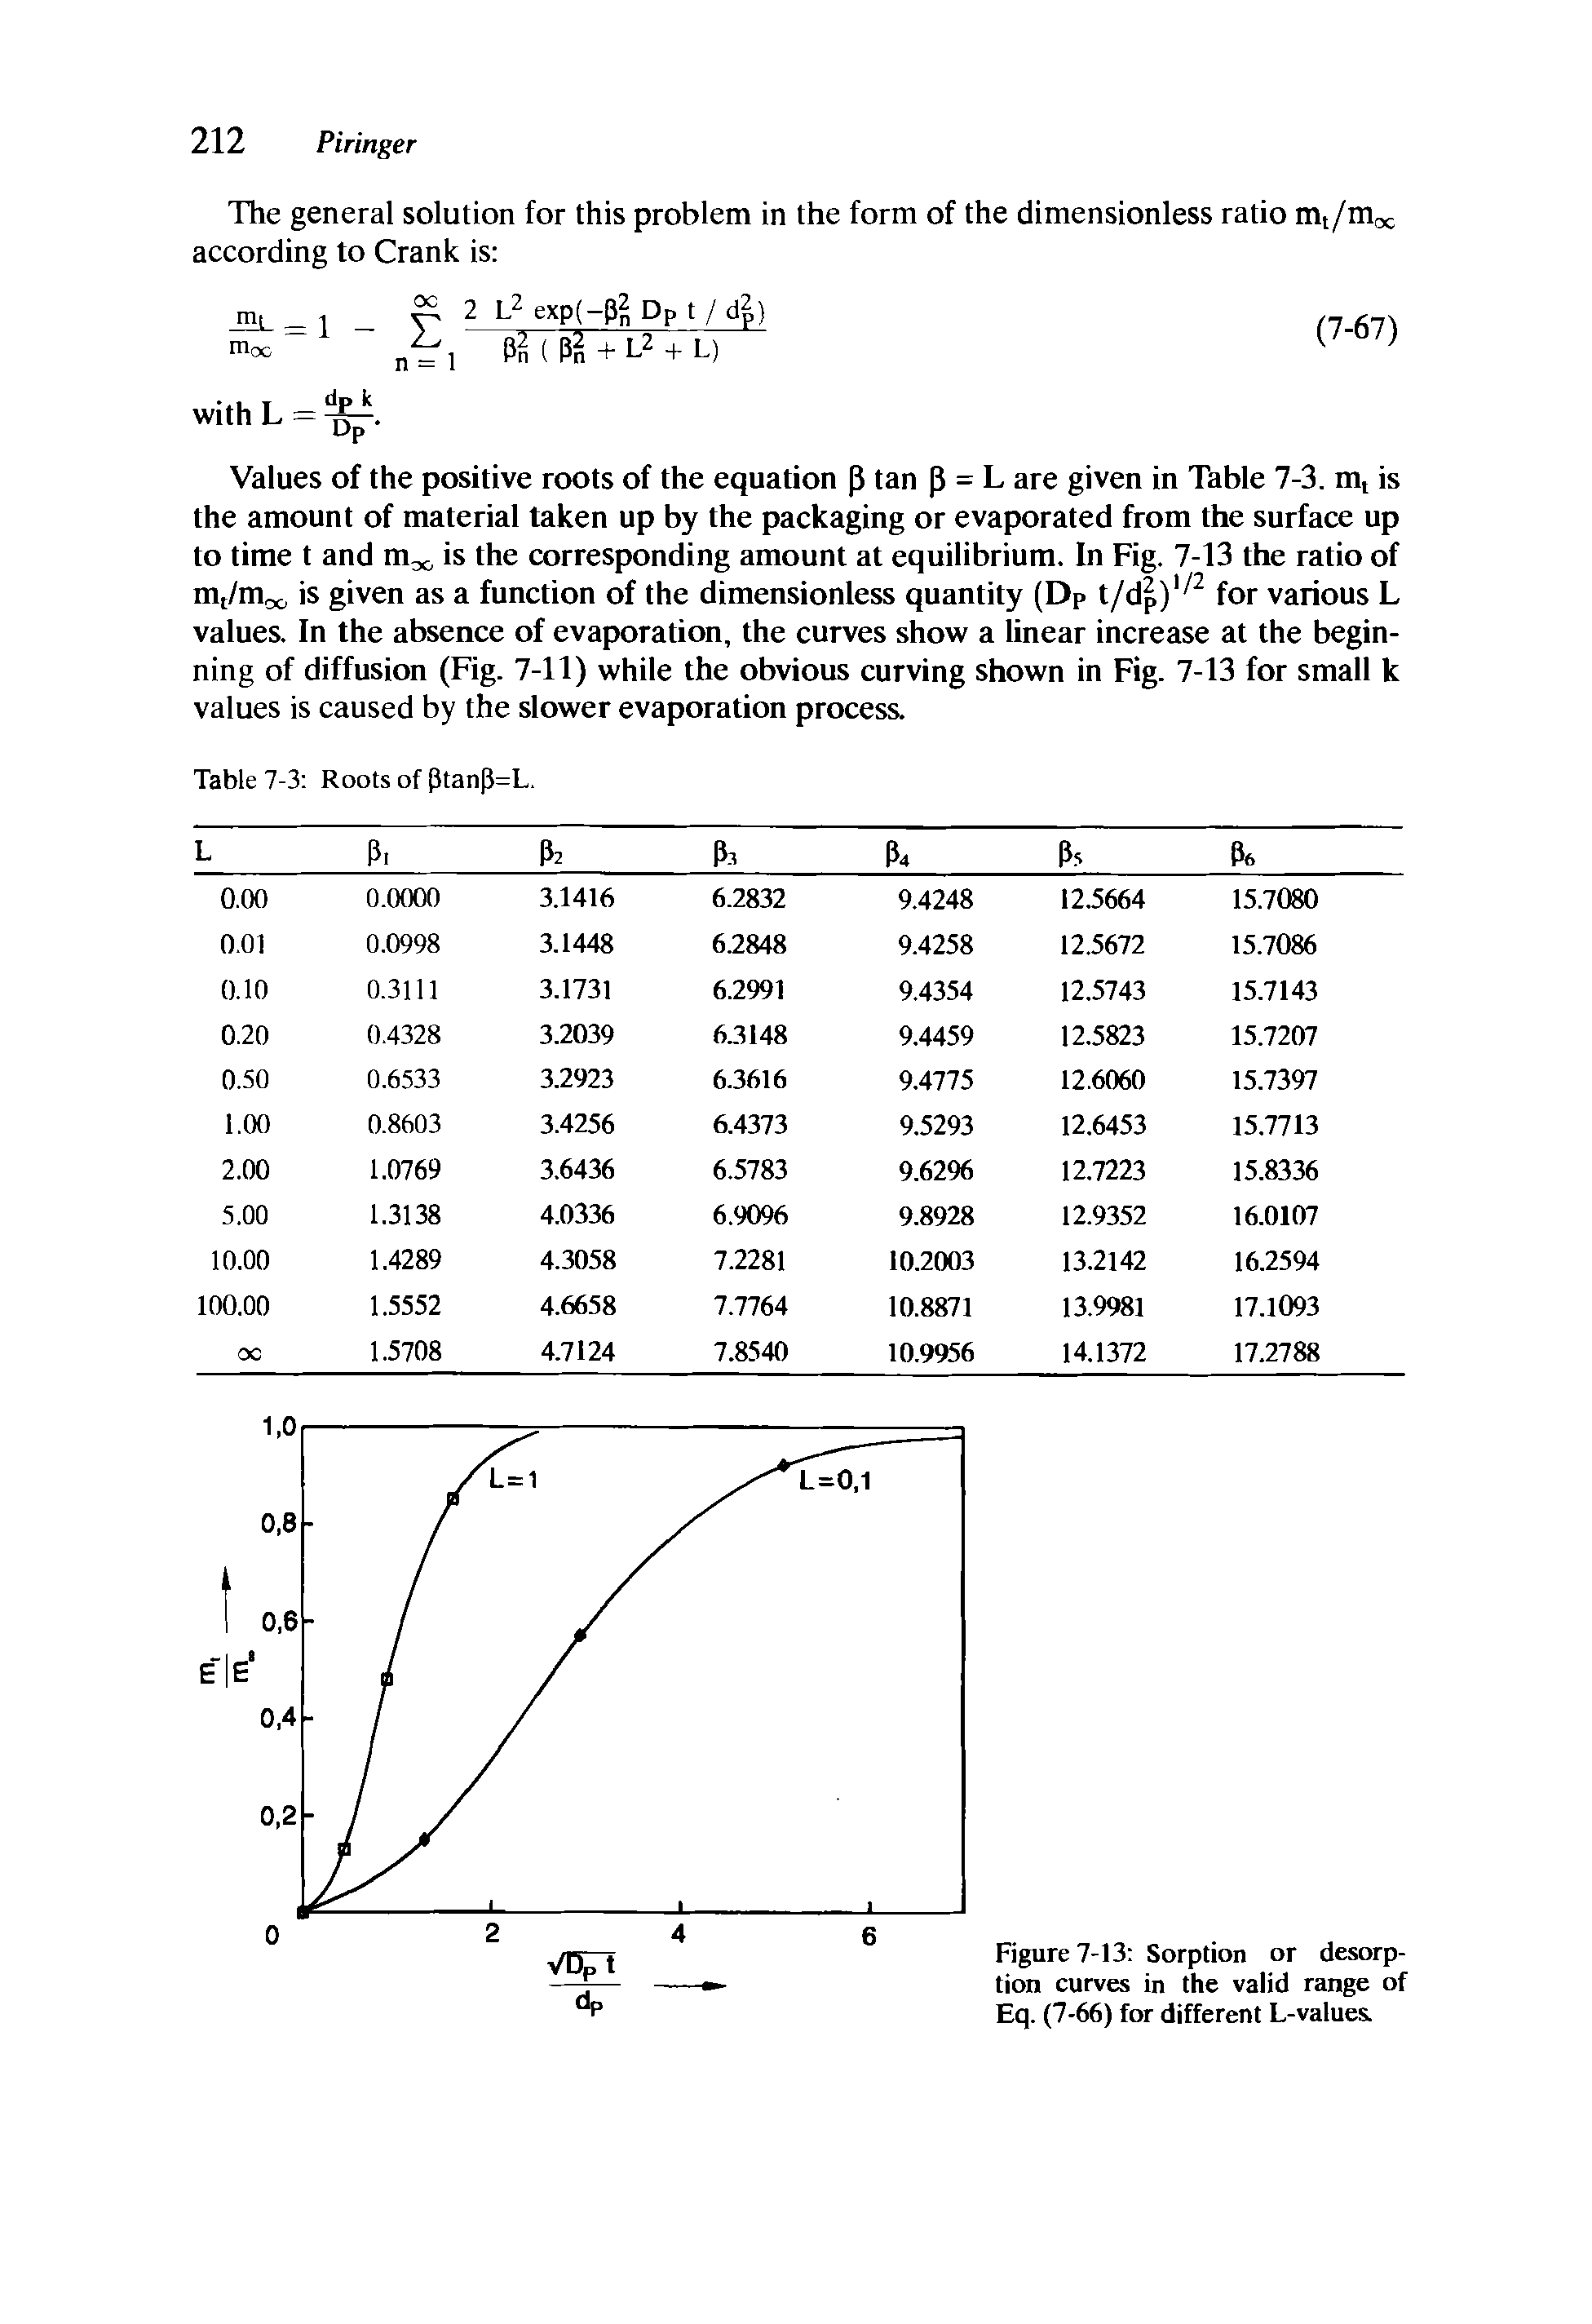 Figure 7-13 Sorption or desorption curves in the valid range of Eq. (7-66) for different L-values.